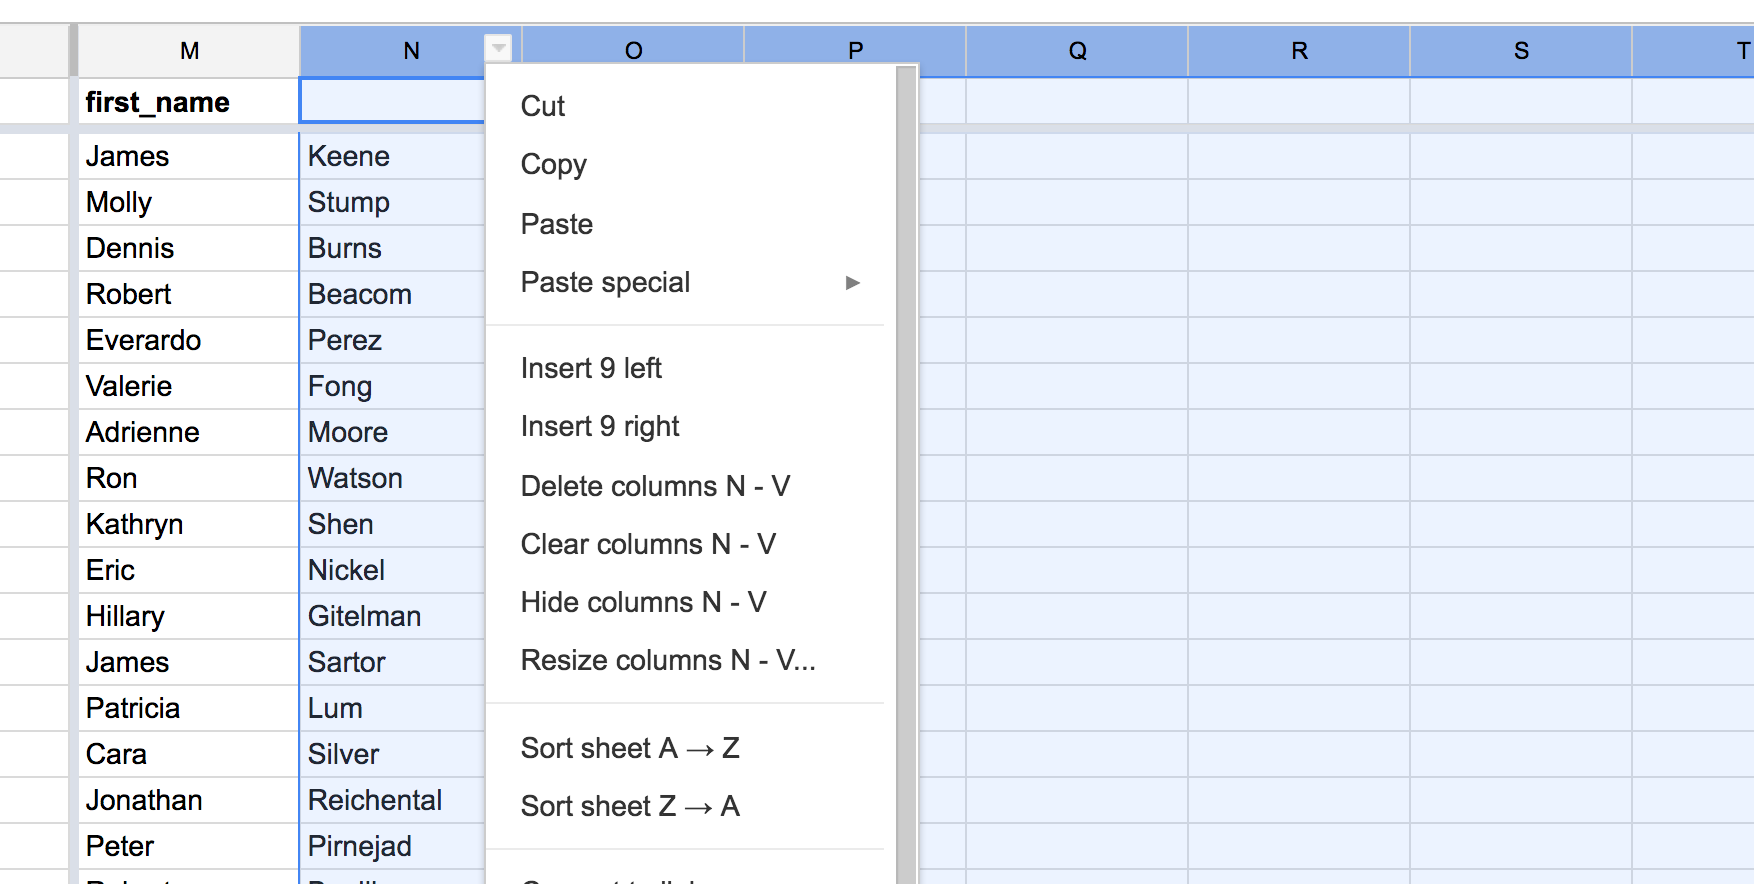 gsheets-clear-columns-n-toinfinity.png